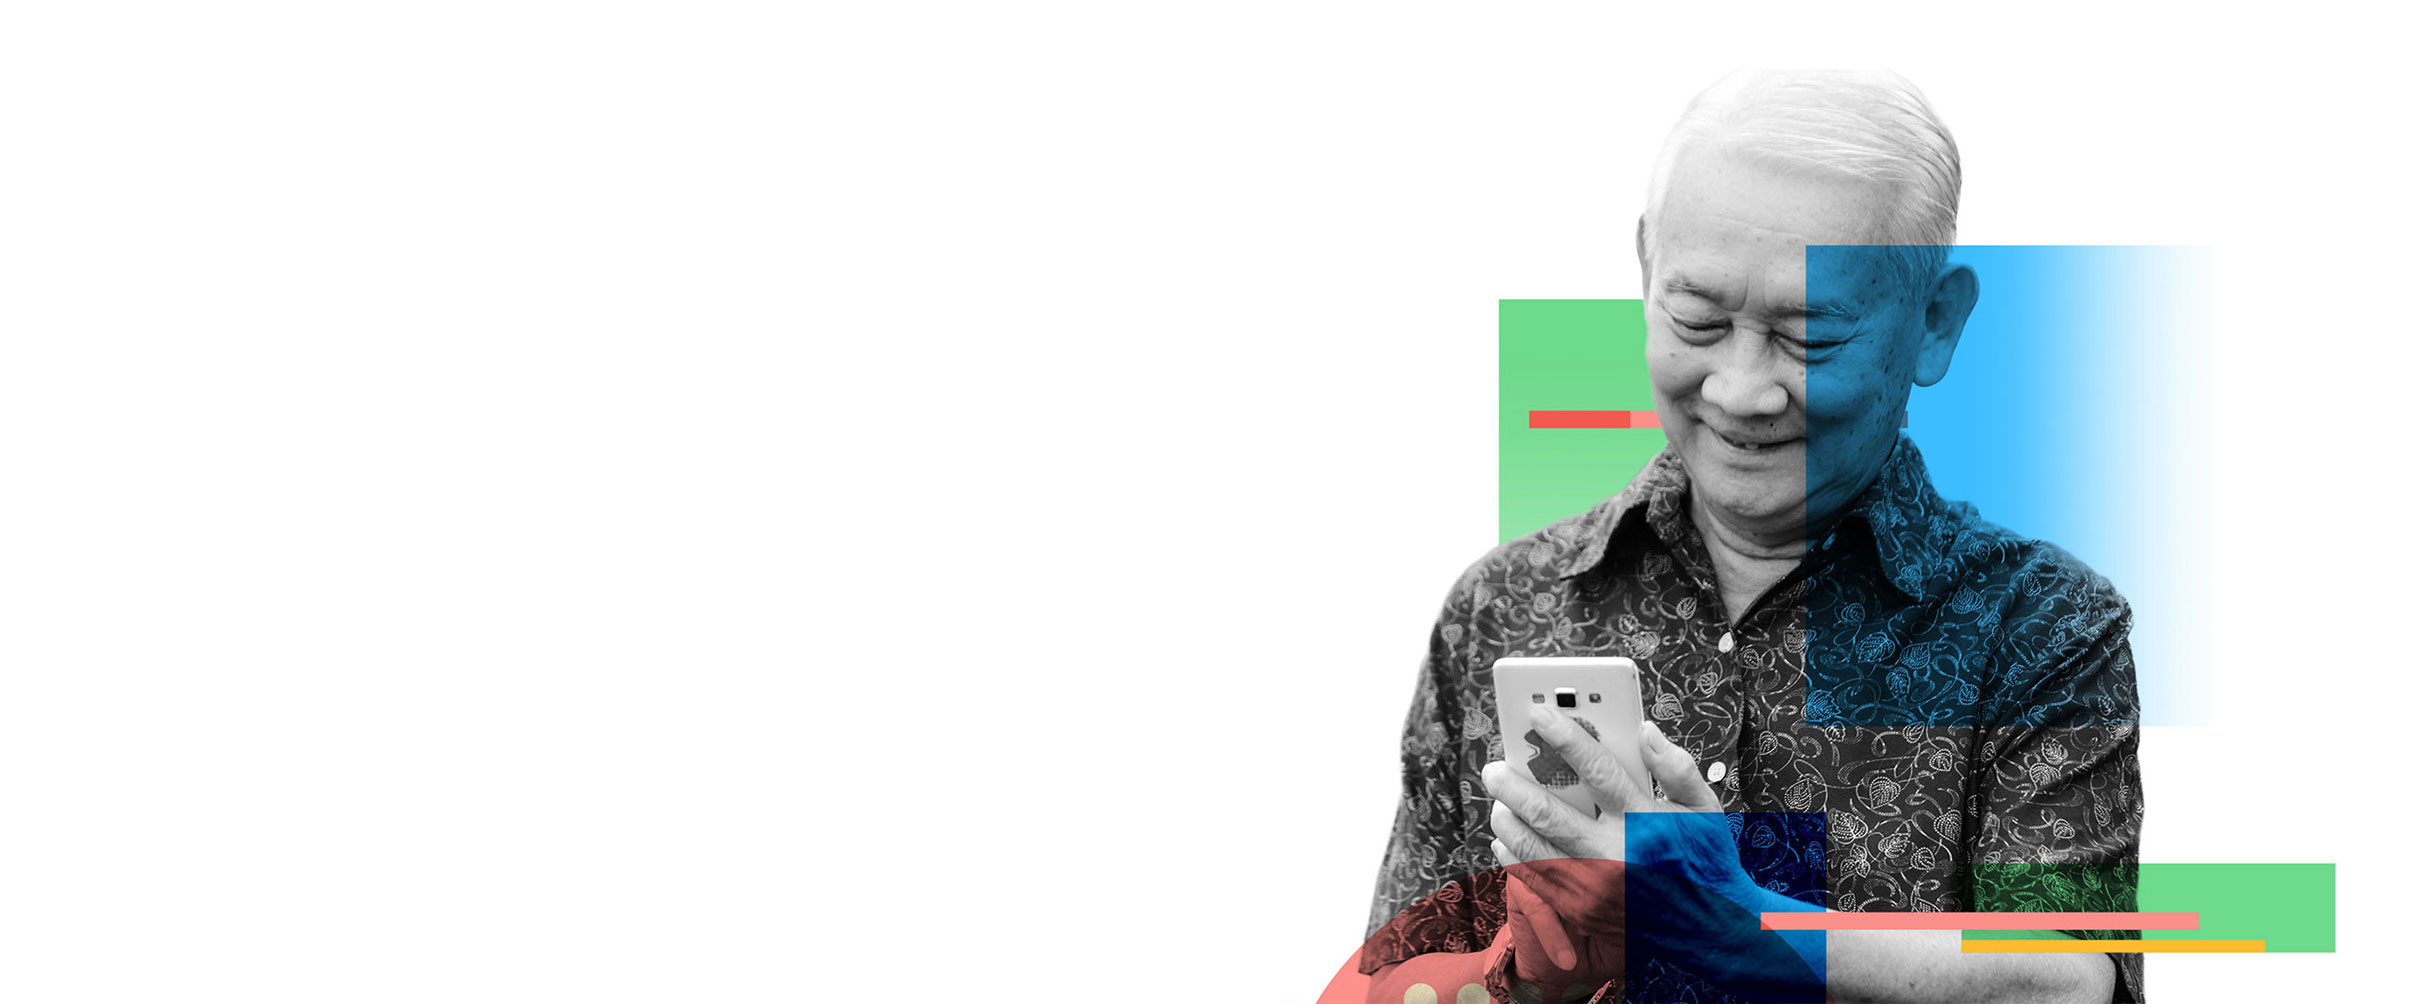 Older man using FIDO authentication on smartphone